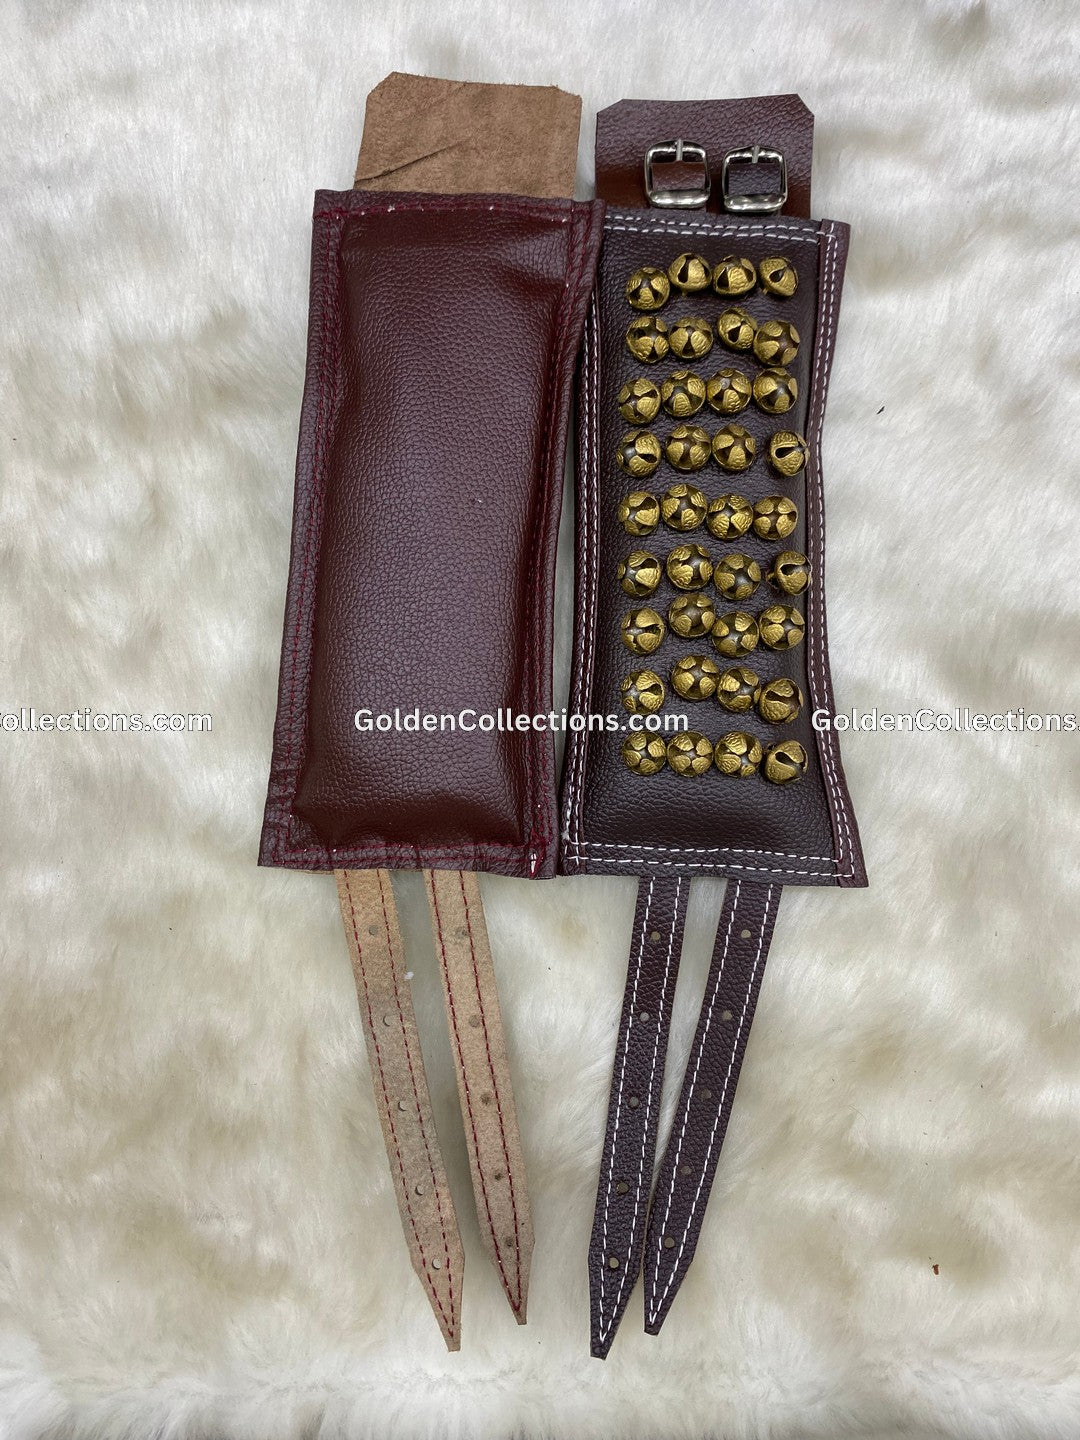 4-Line-Brown-Leather-Ghungroo-Salangai-GoldenCollections-2